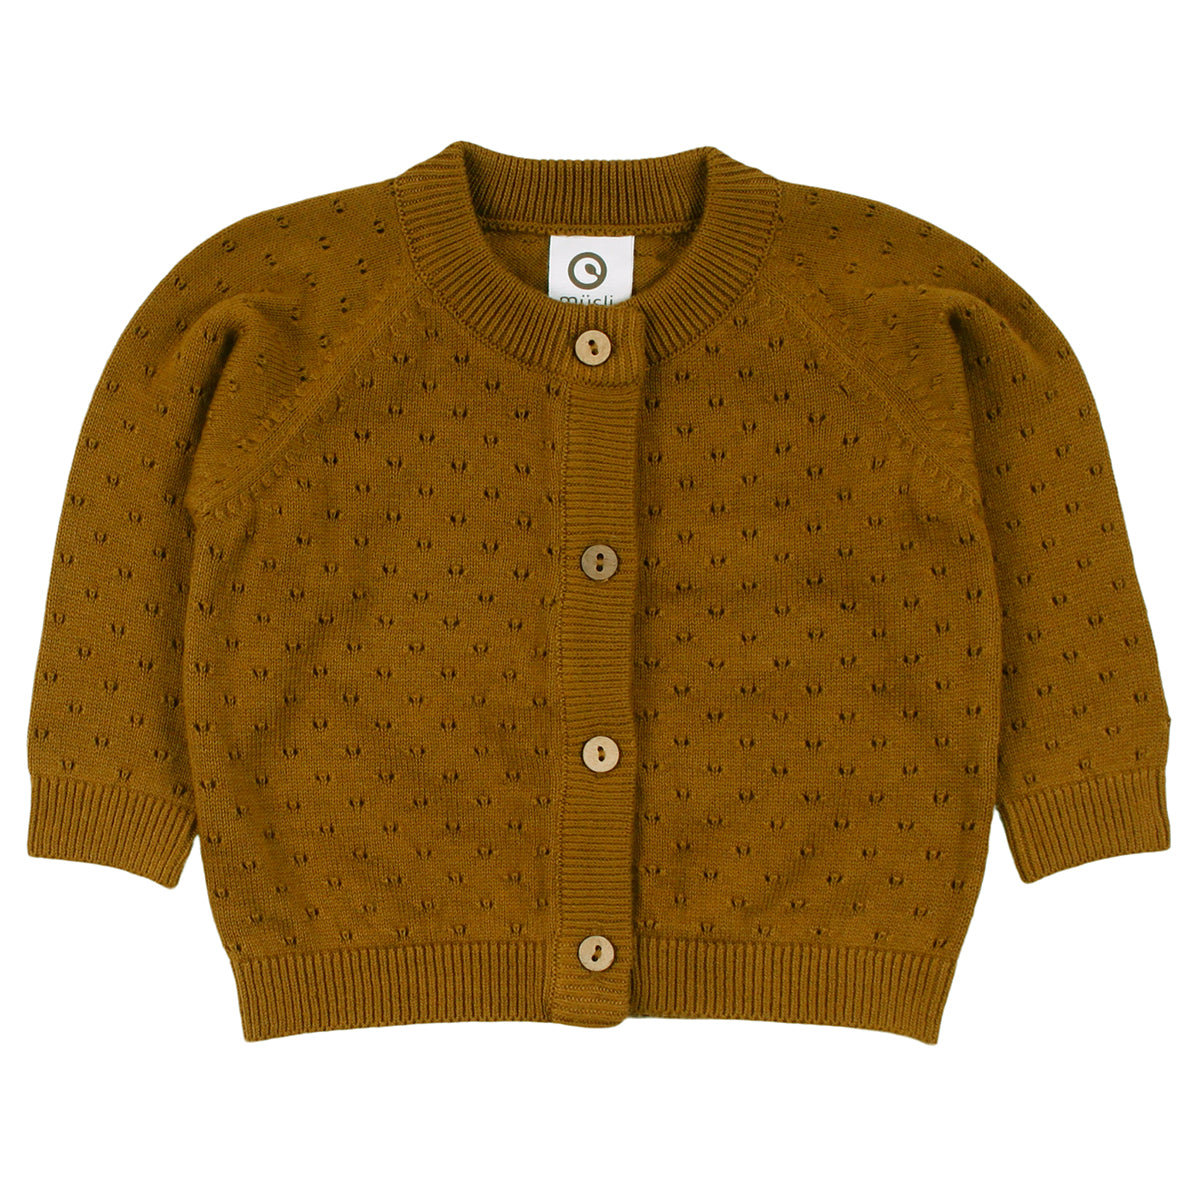 Knit cardigan - nut front